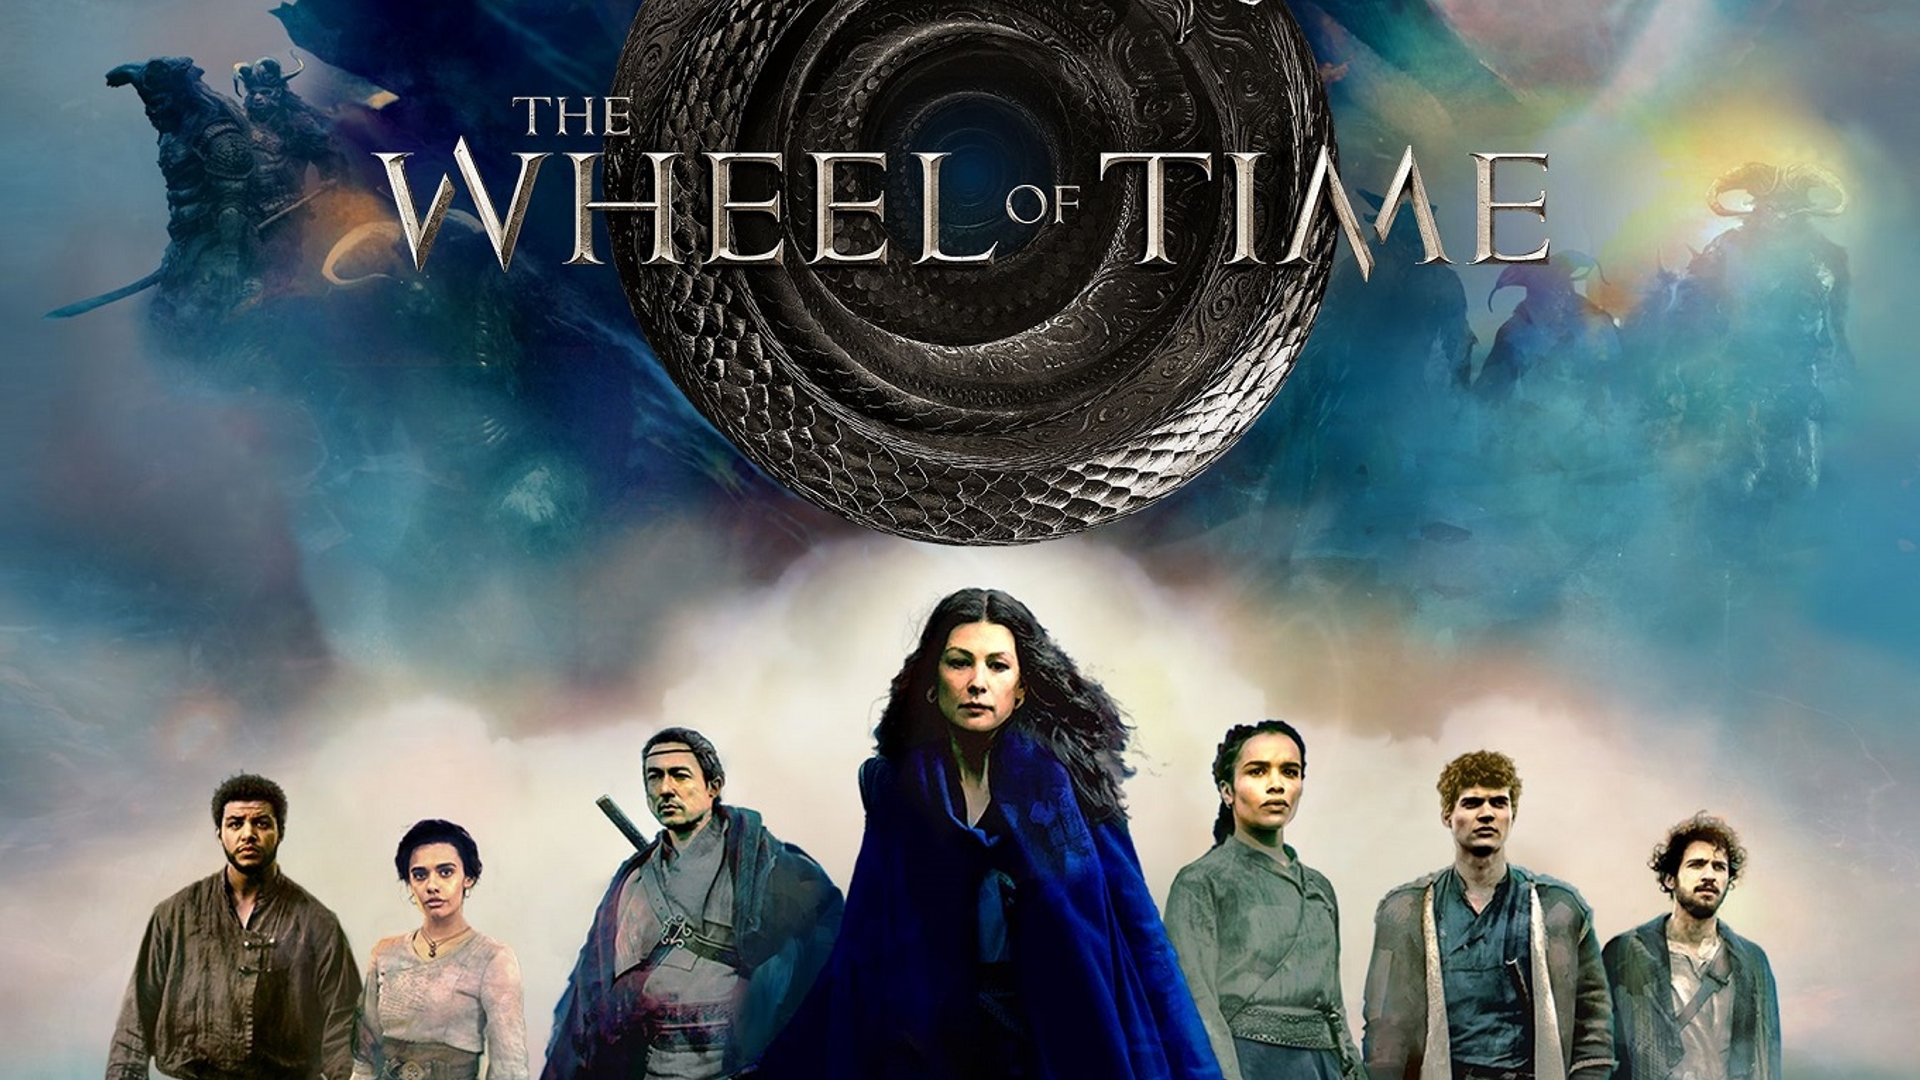 The Wheel of Time